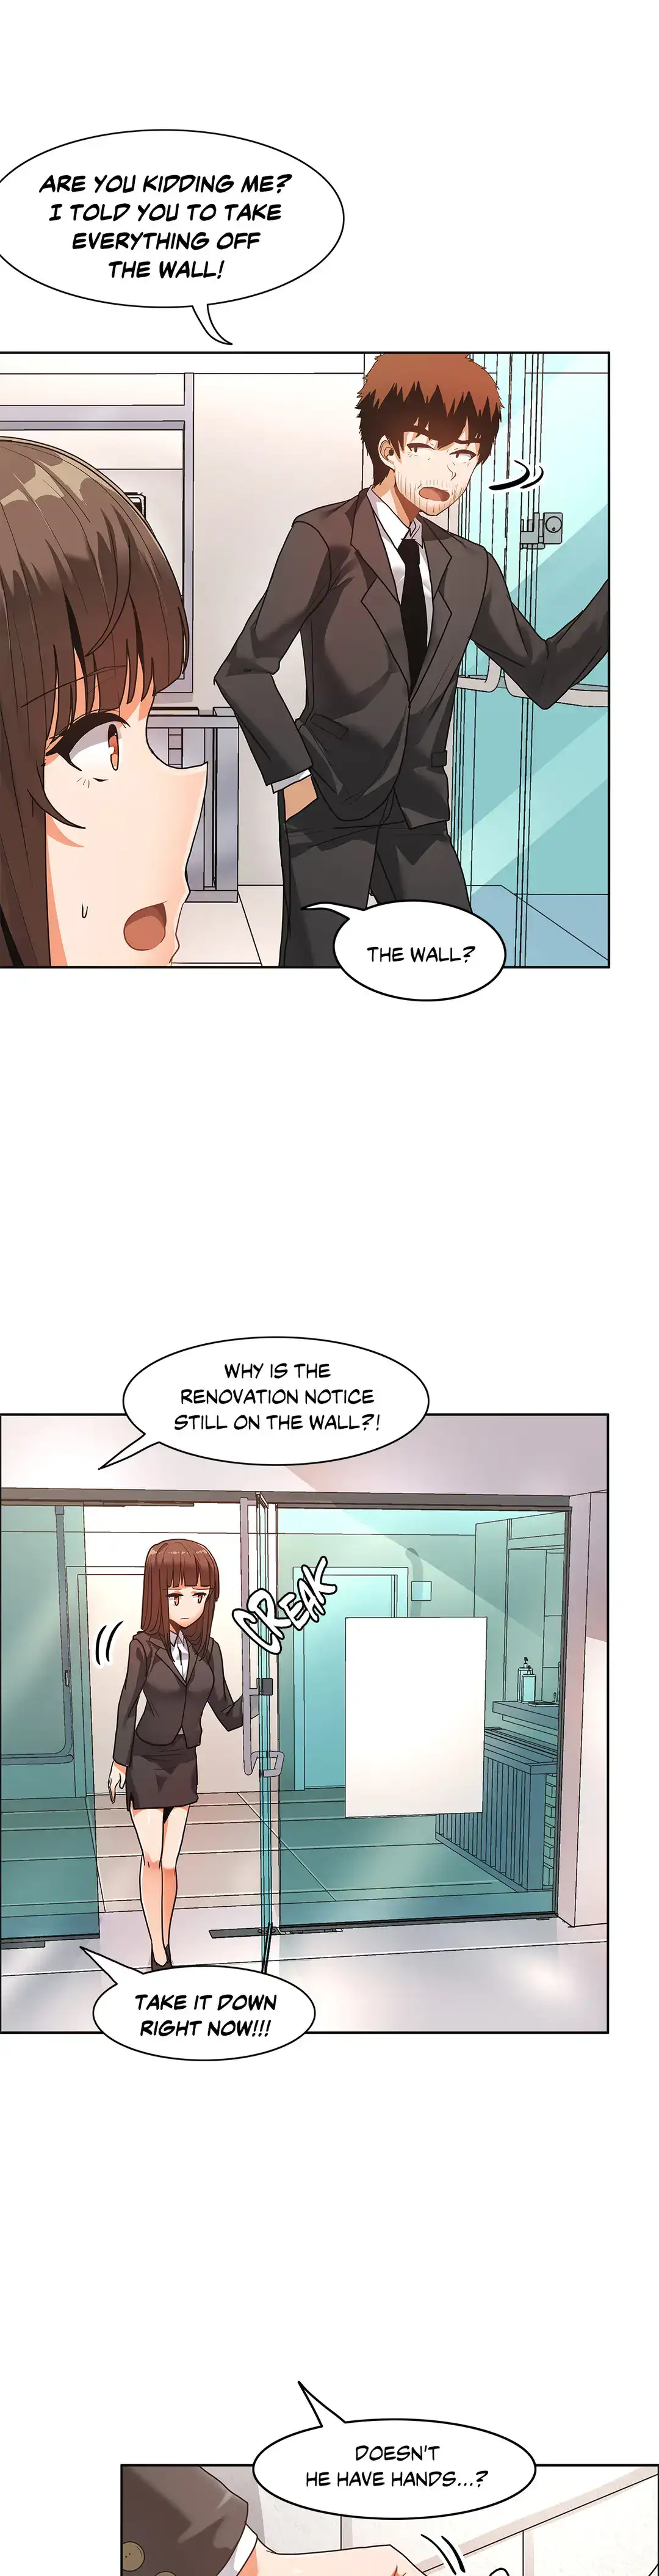 The Girl That Wet the Wall - Chapter 36 Page 3